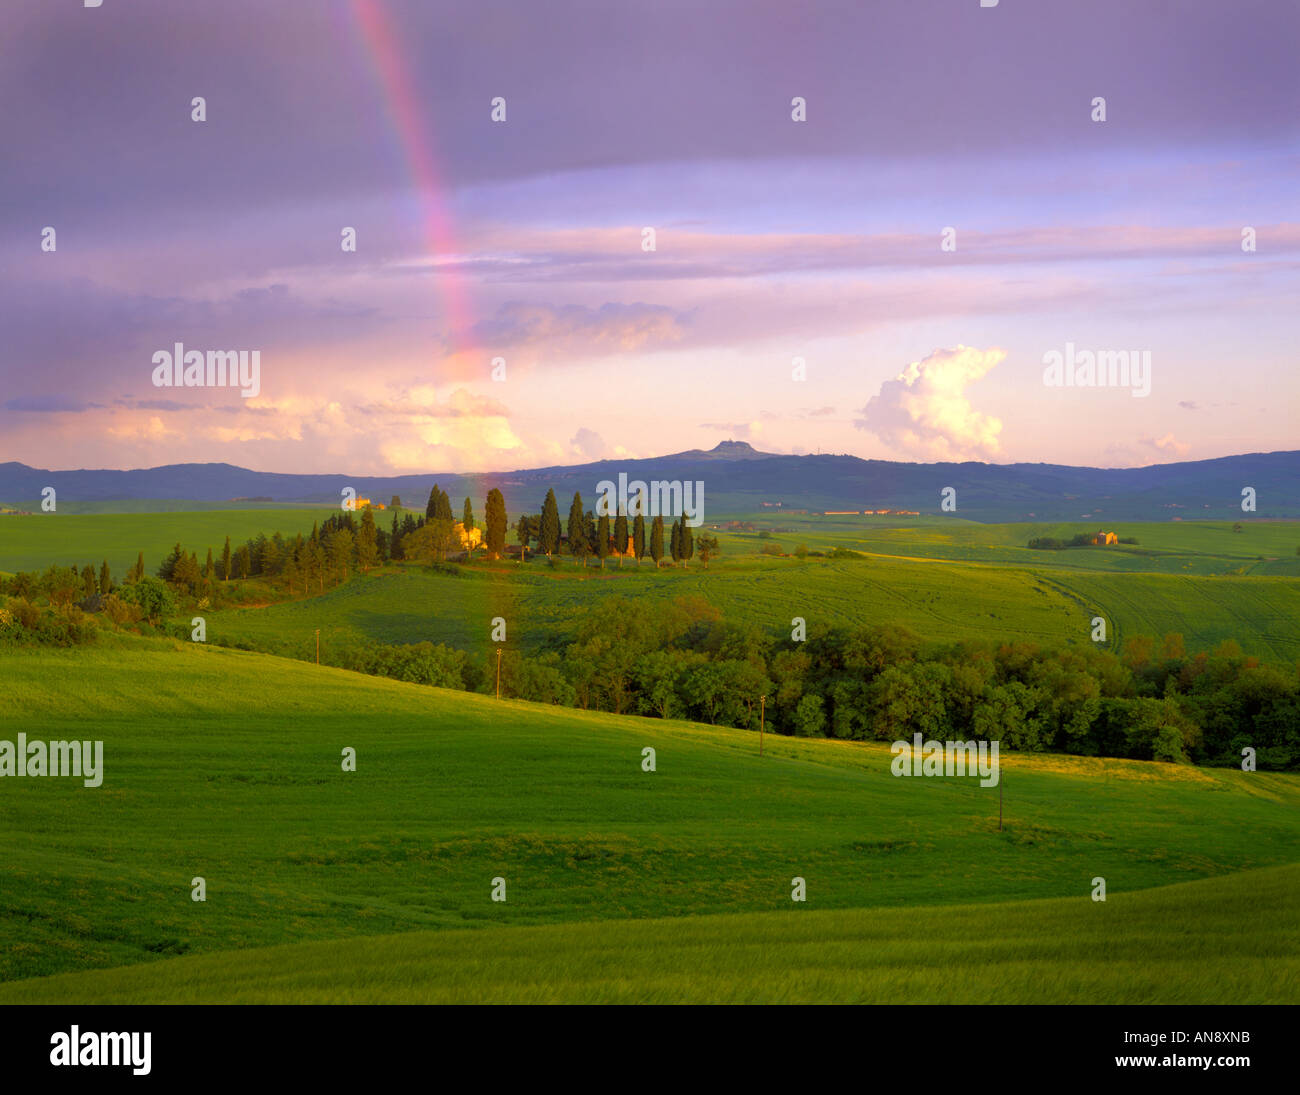 Tuscan sunset with rainbow in springtime in Italy Stock Photo